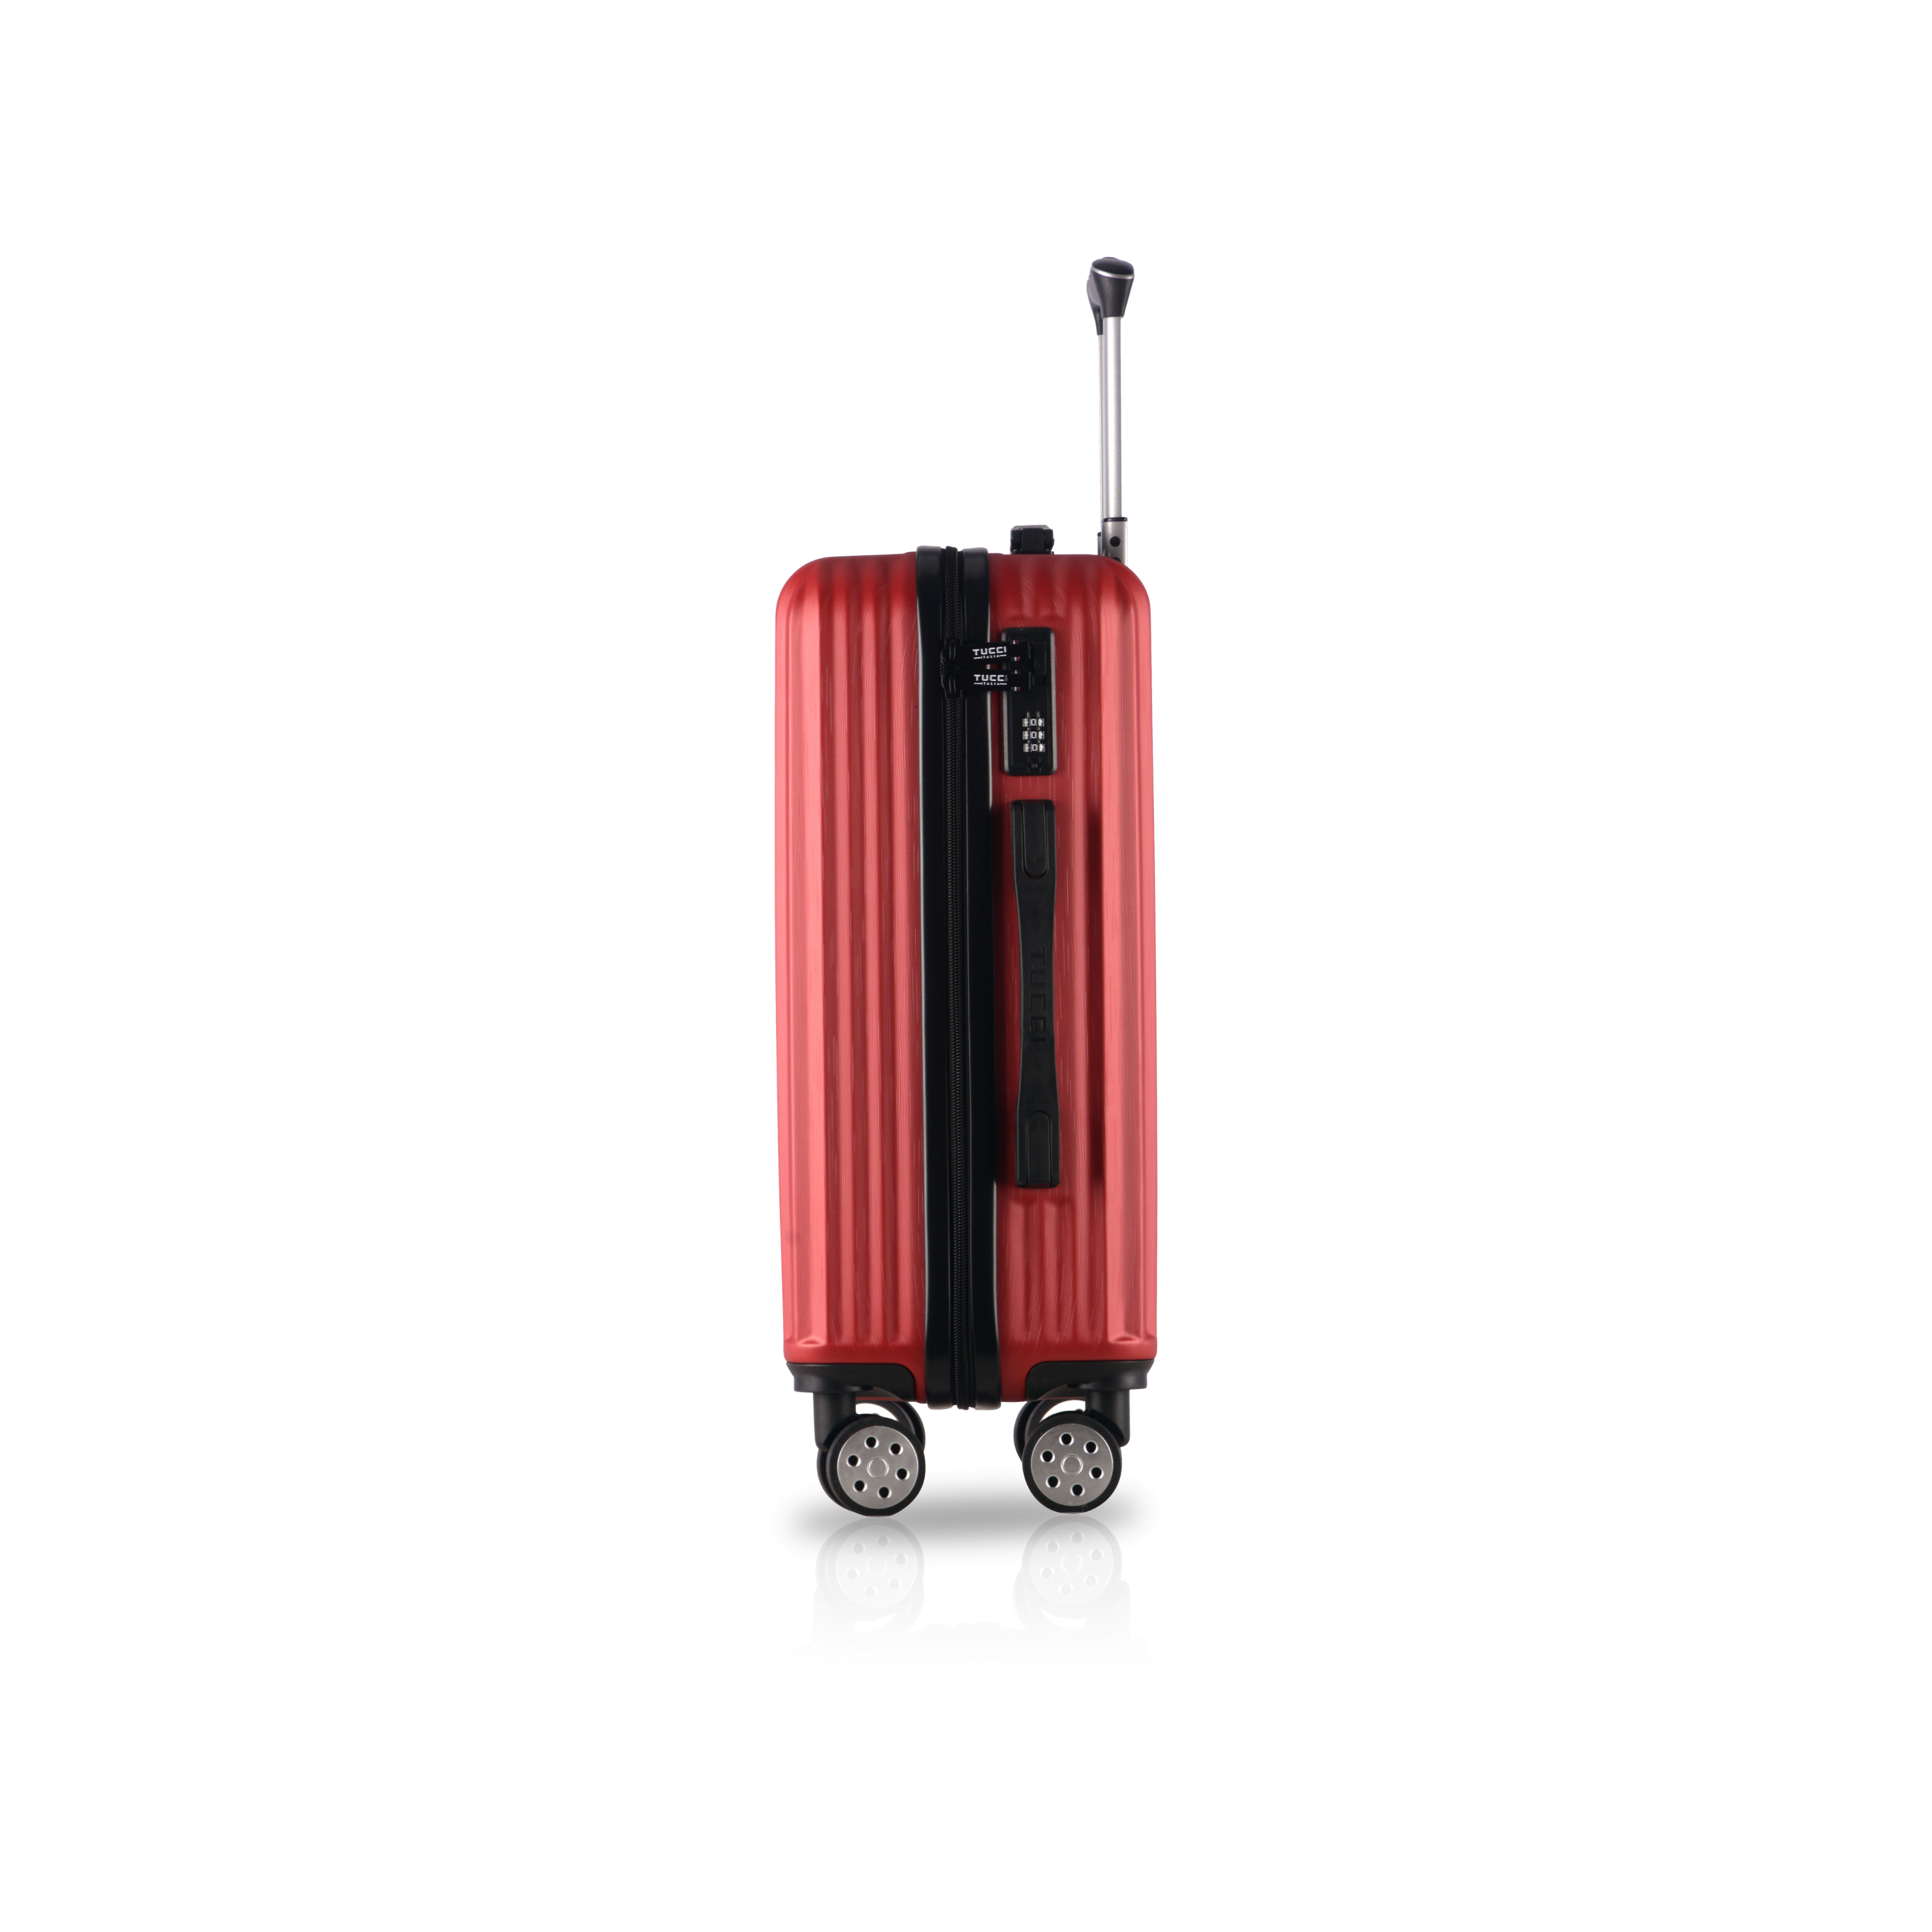 TUCCI BANDA ABS 20" Carry On Luggage Suitcase